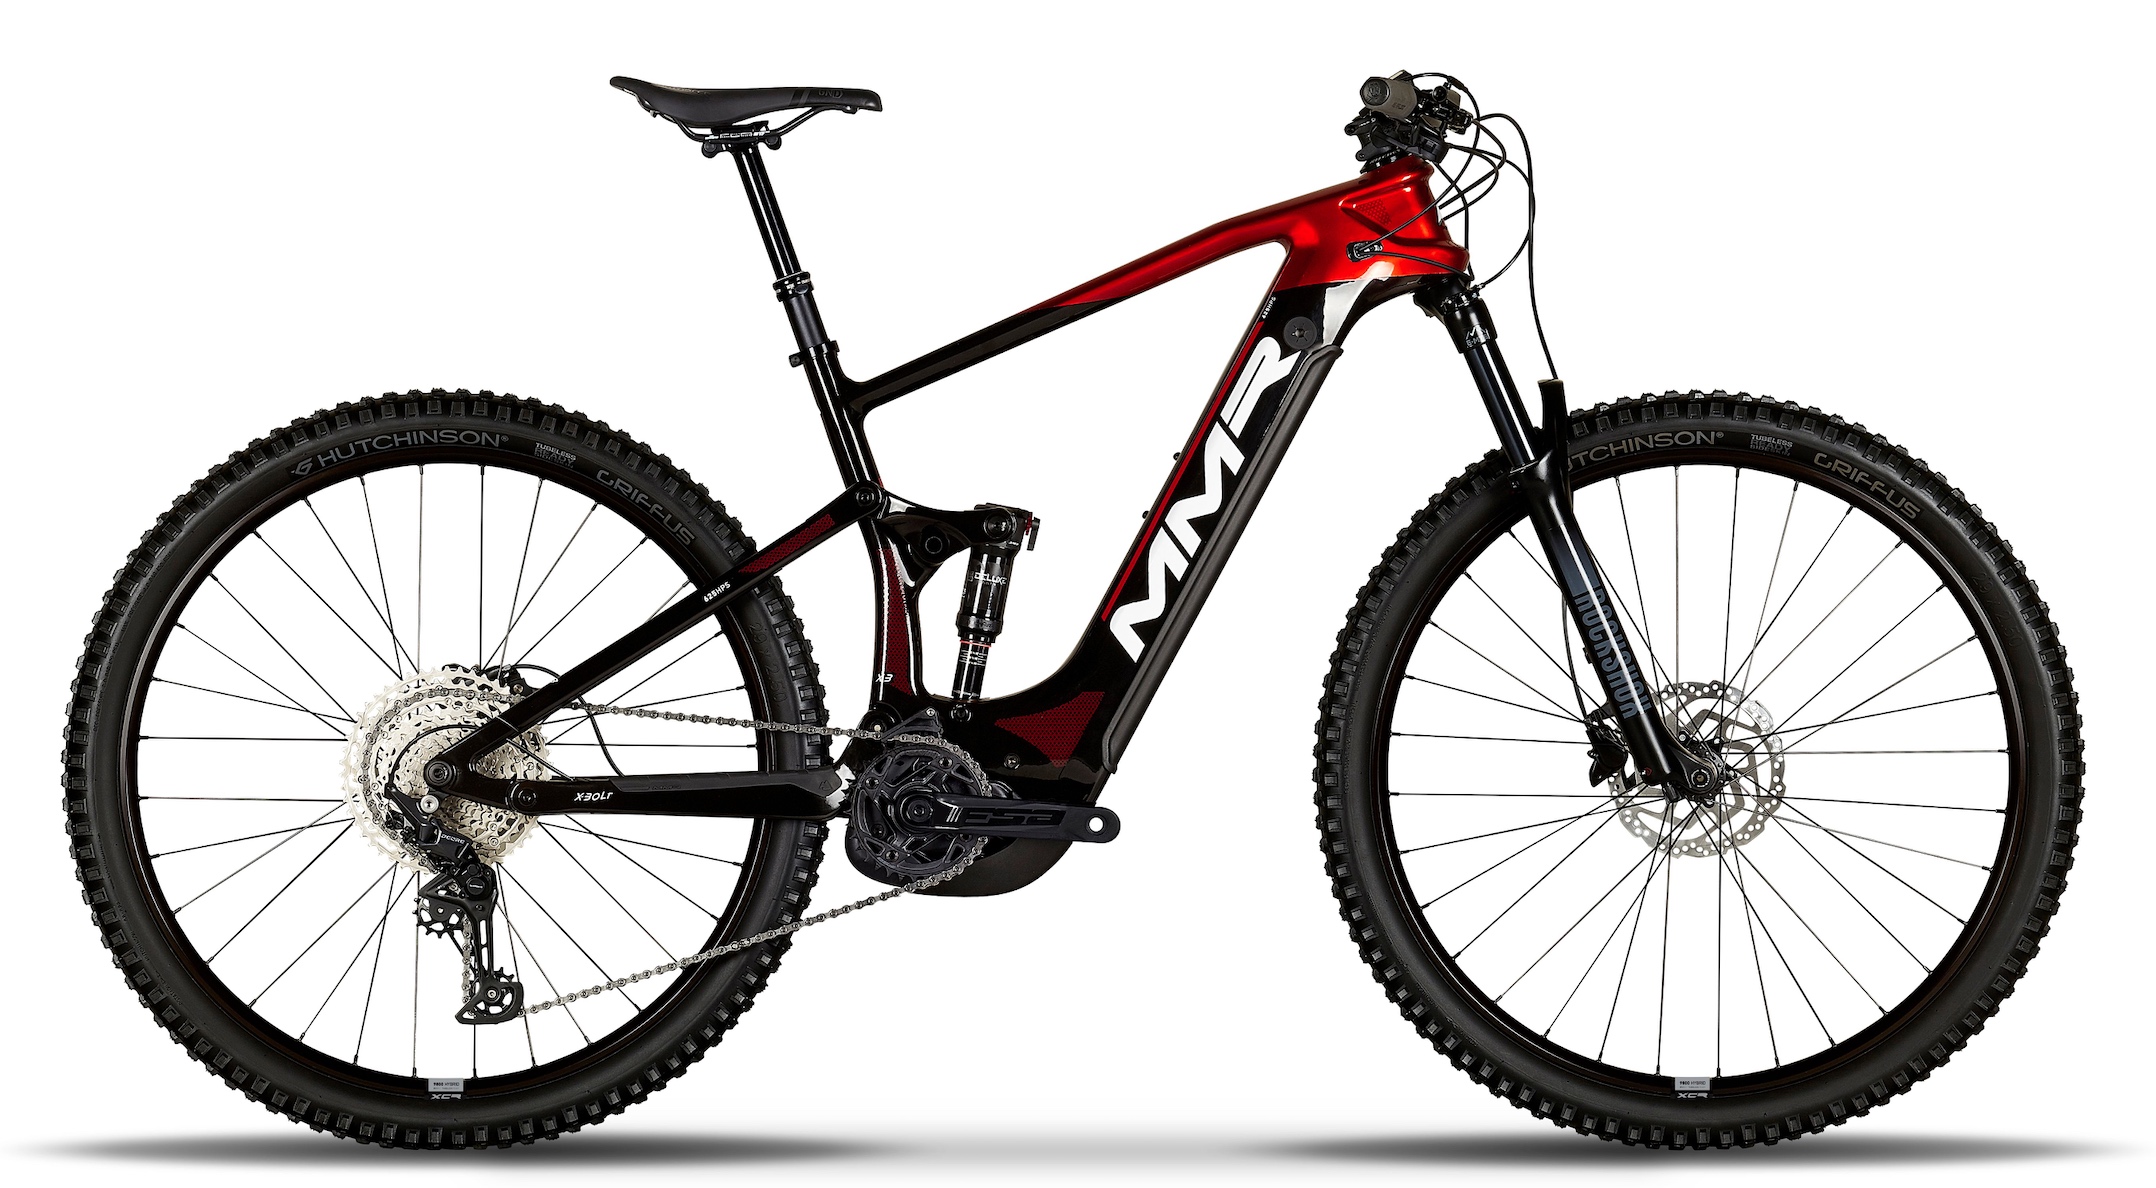 MMR X-Bolt E-MTB in Chrome Red. Side view.